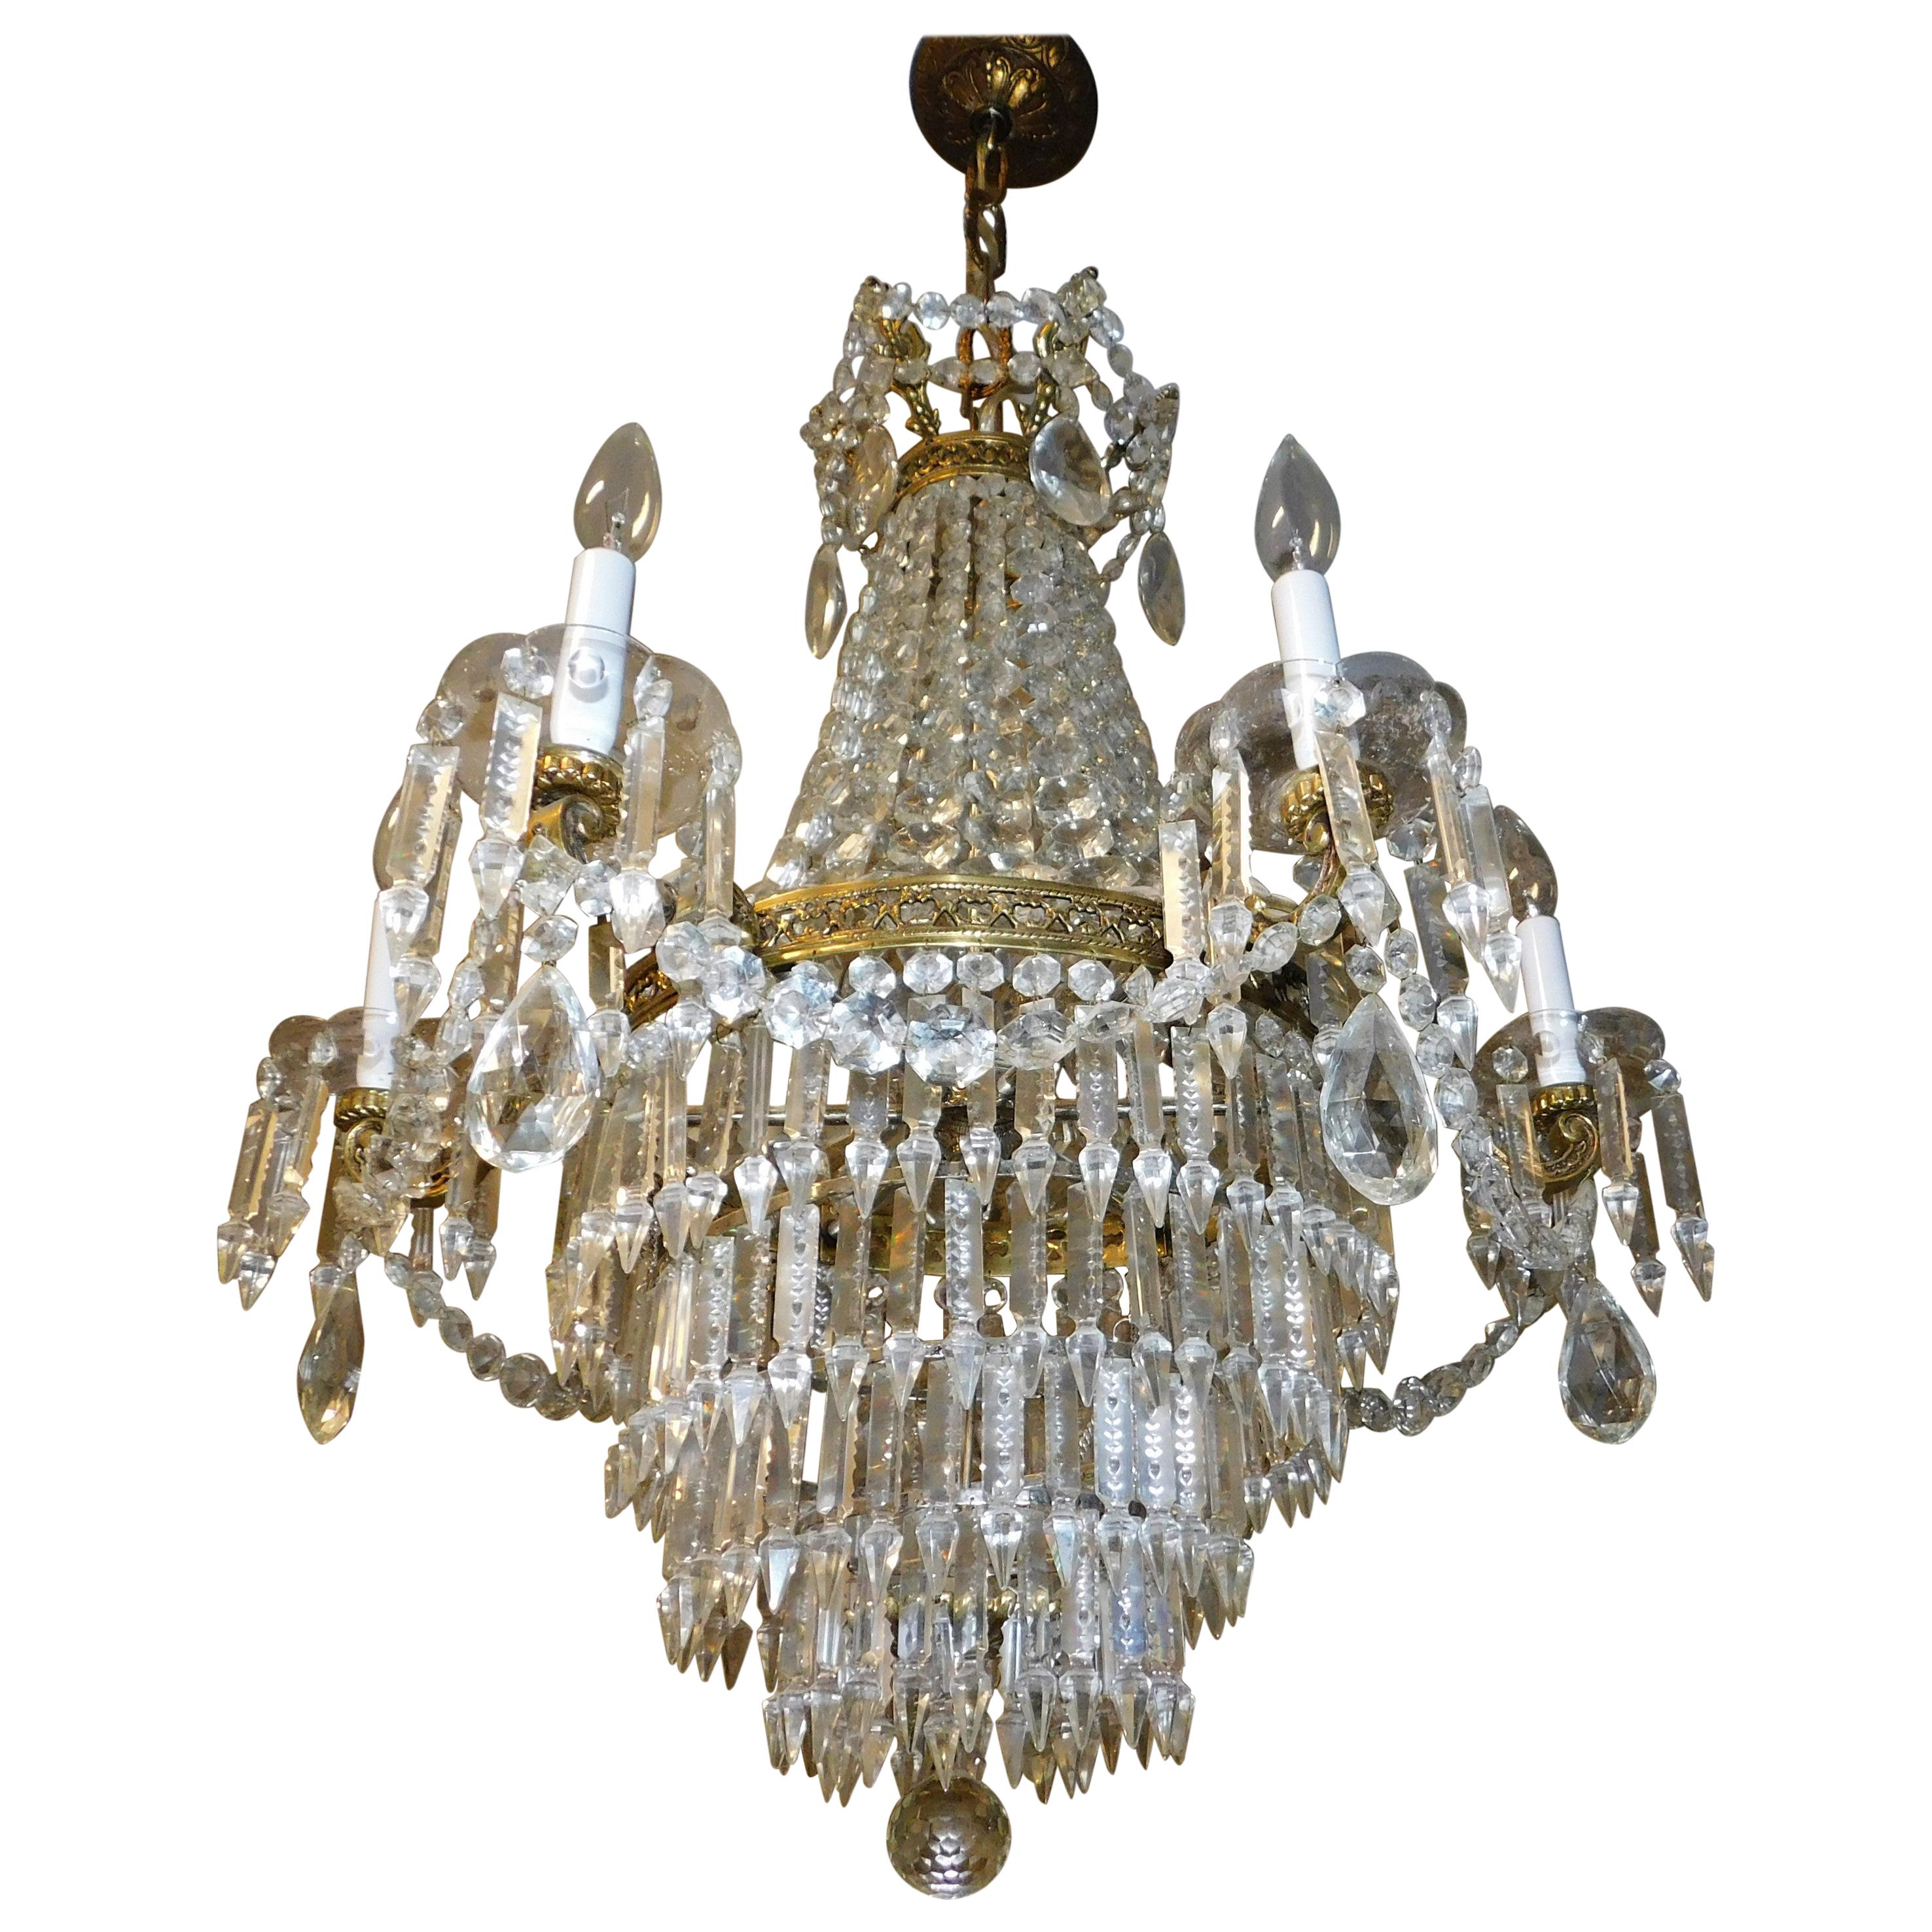 French Crystal and Bronze Six-Light Tiered Chandelier Turn of the Century